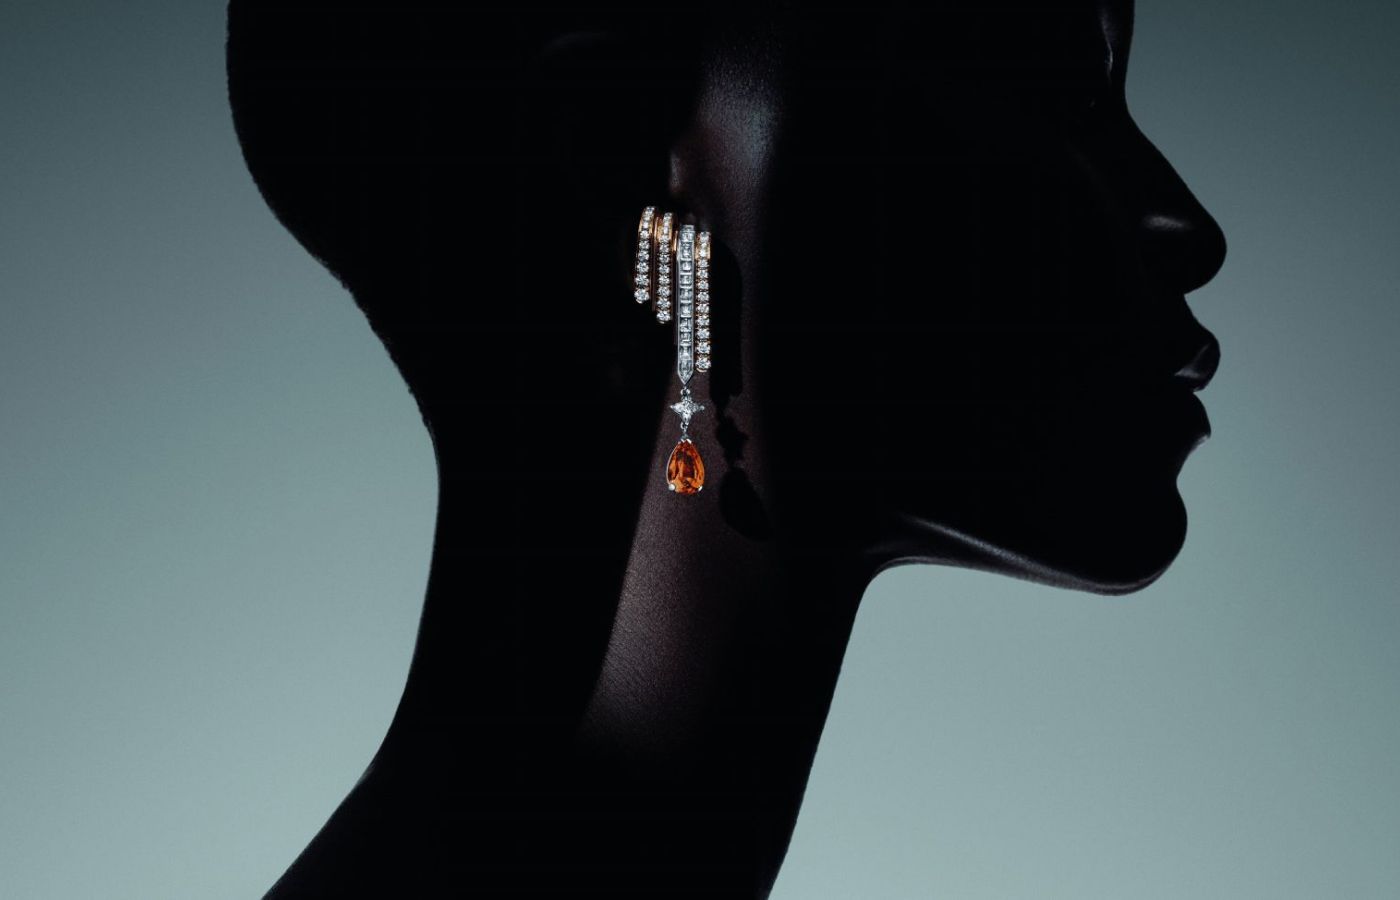 Louis Vuitton's haute jewelry collection 'Deep Time' takes a